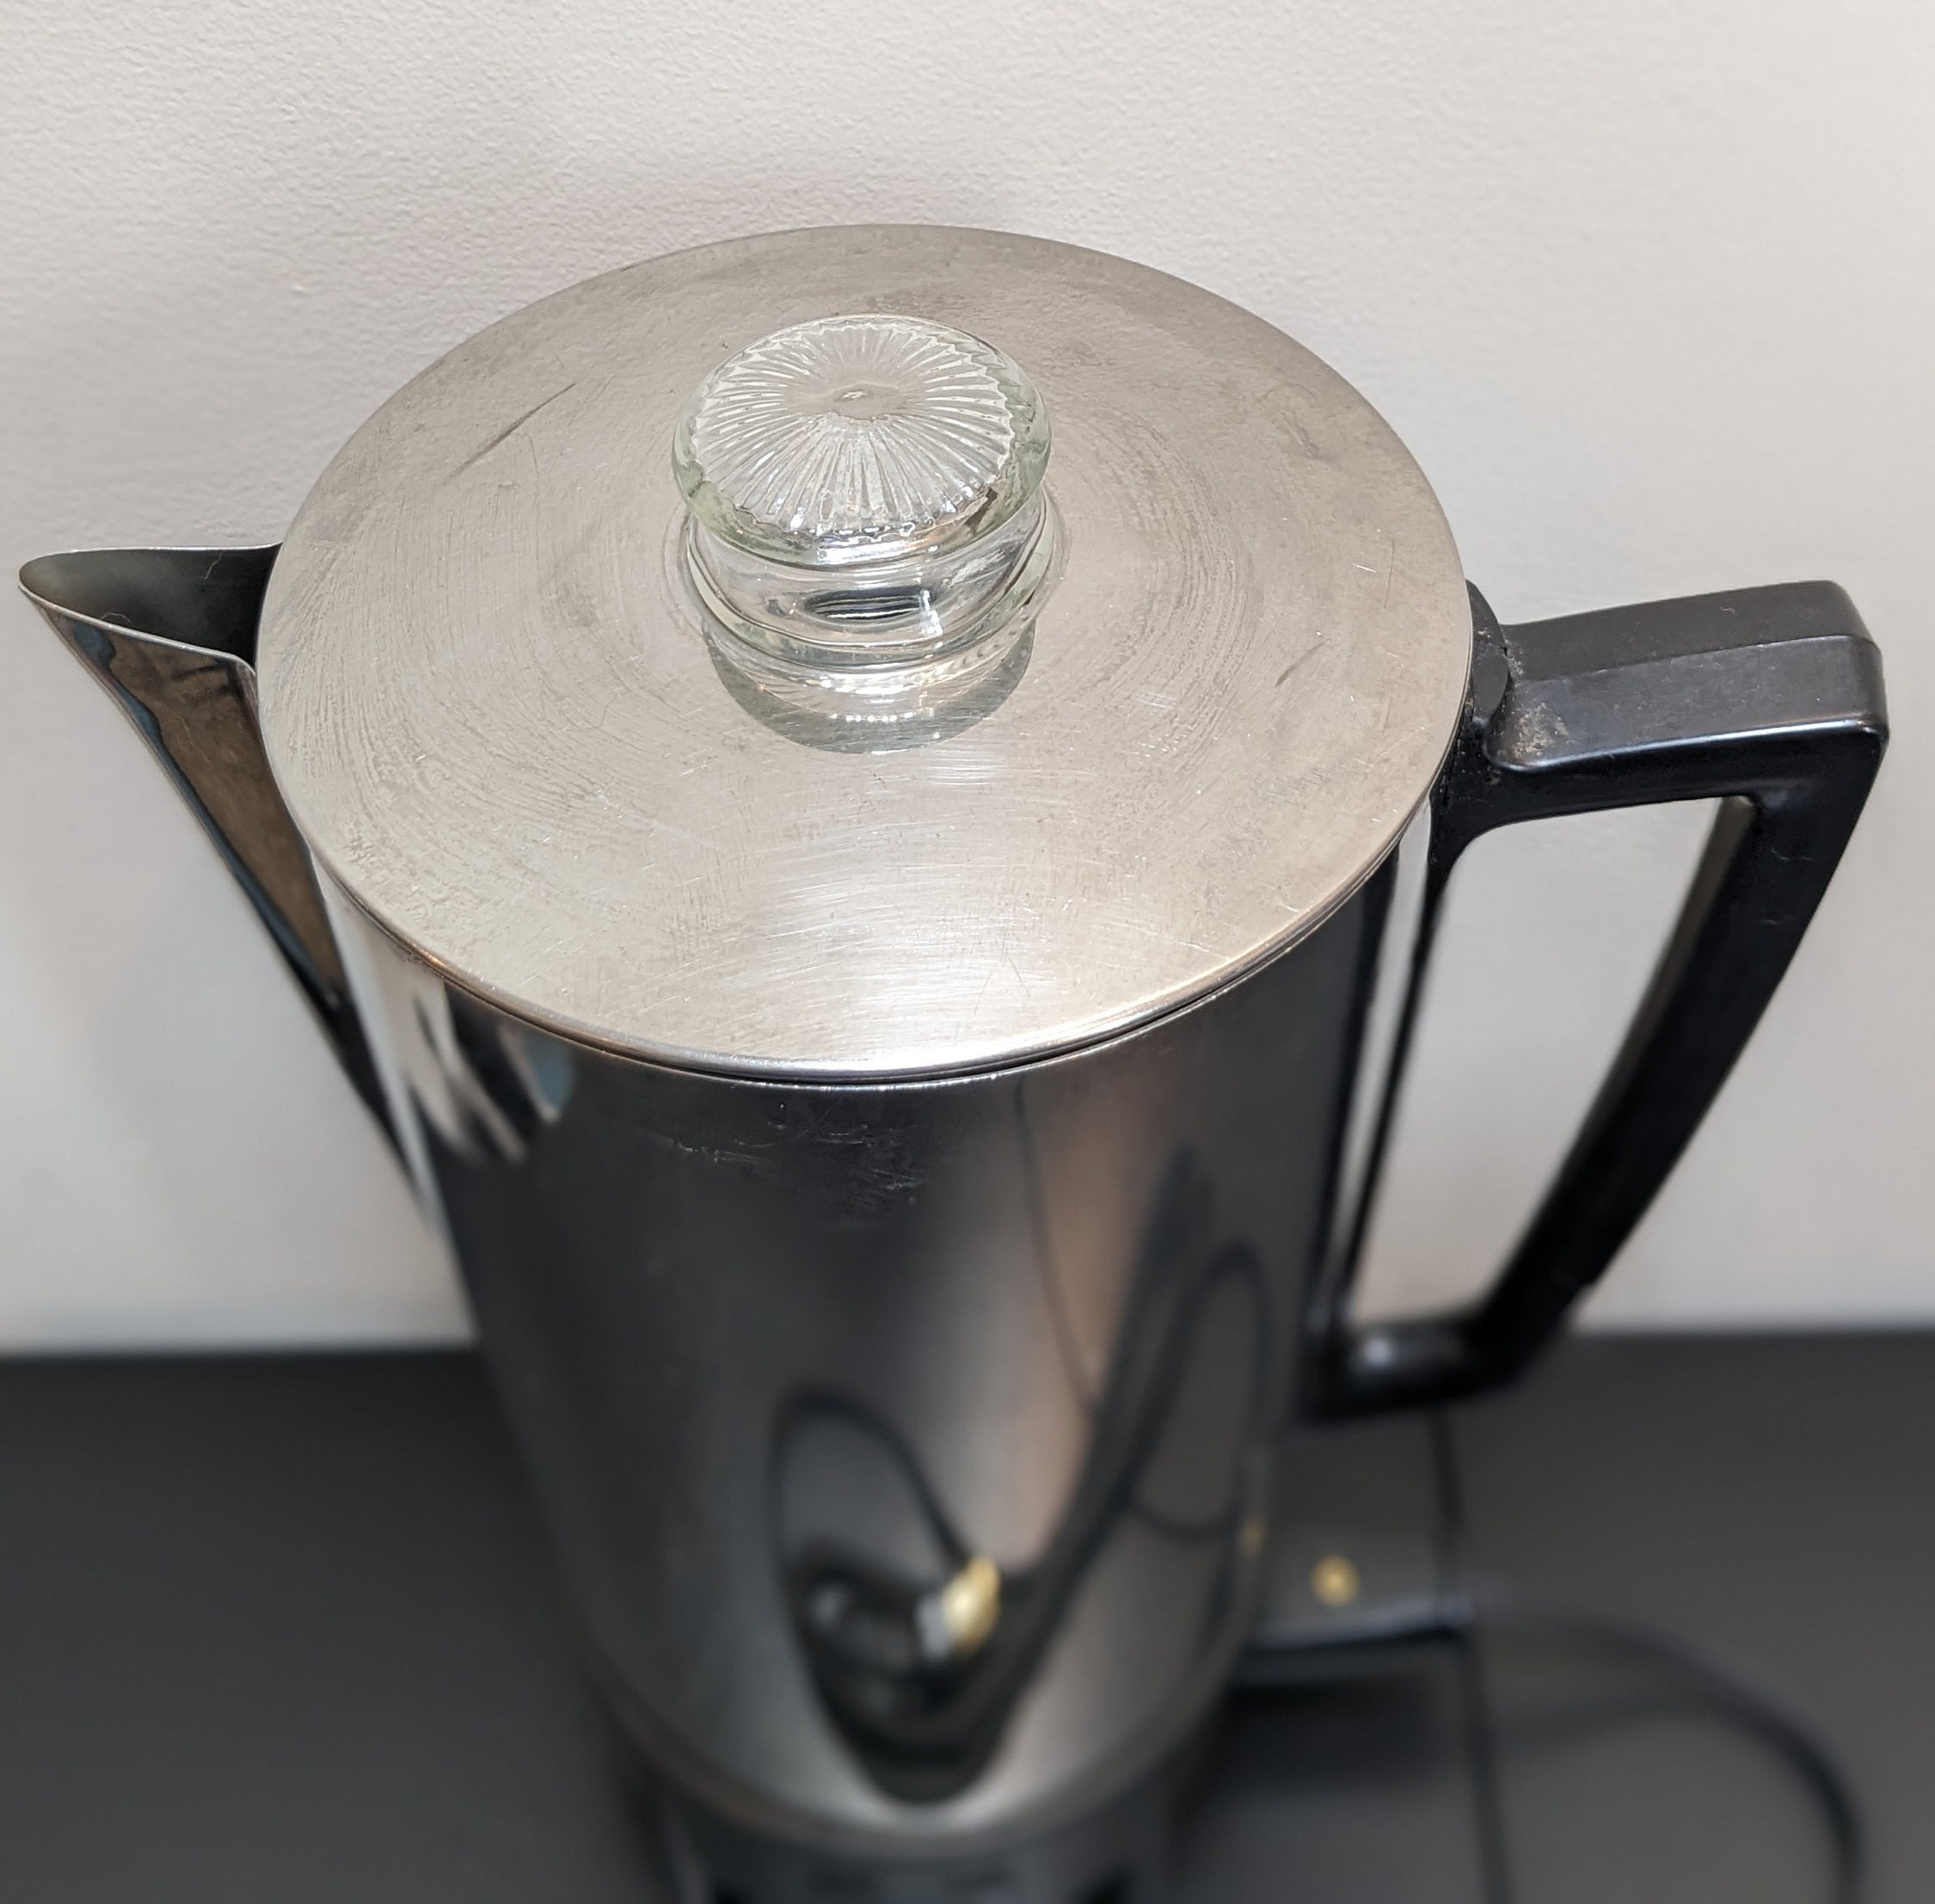 Vintage MIRRO-MATIC 10-35 Cup Automatic Electric Coffee Percolator Large  Potluck